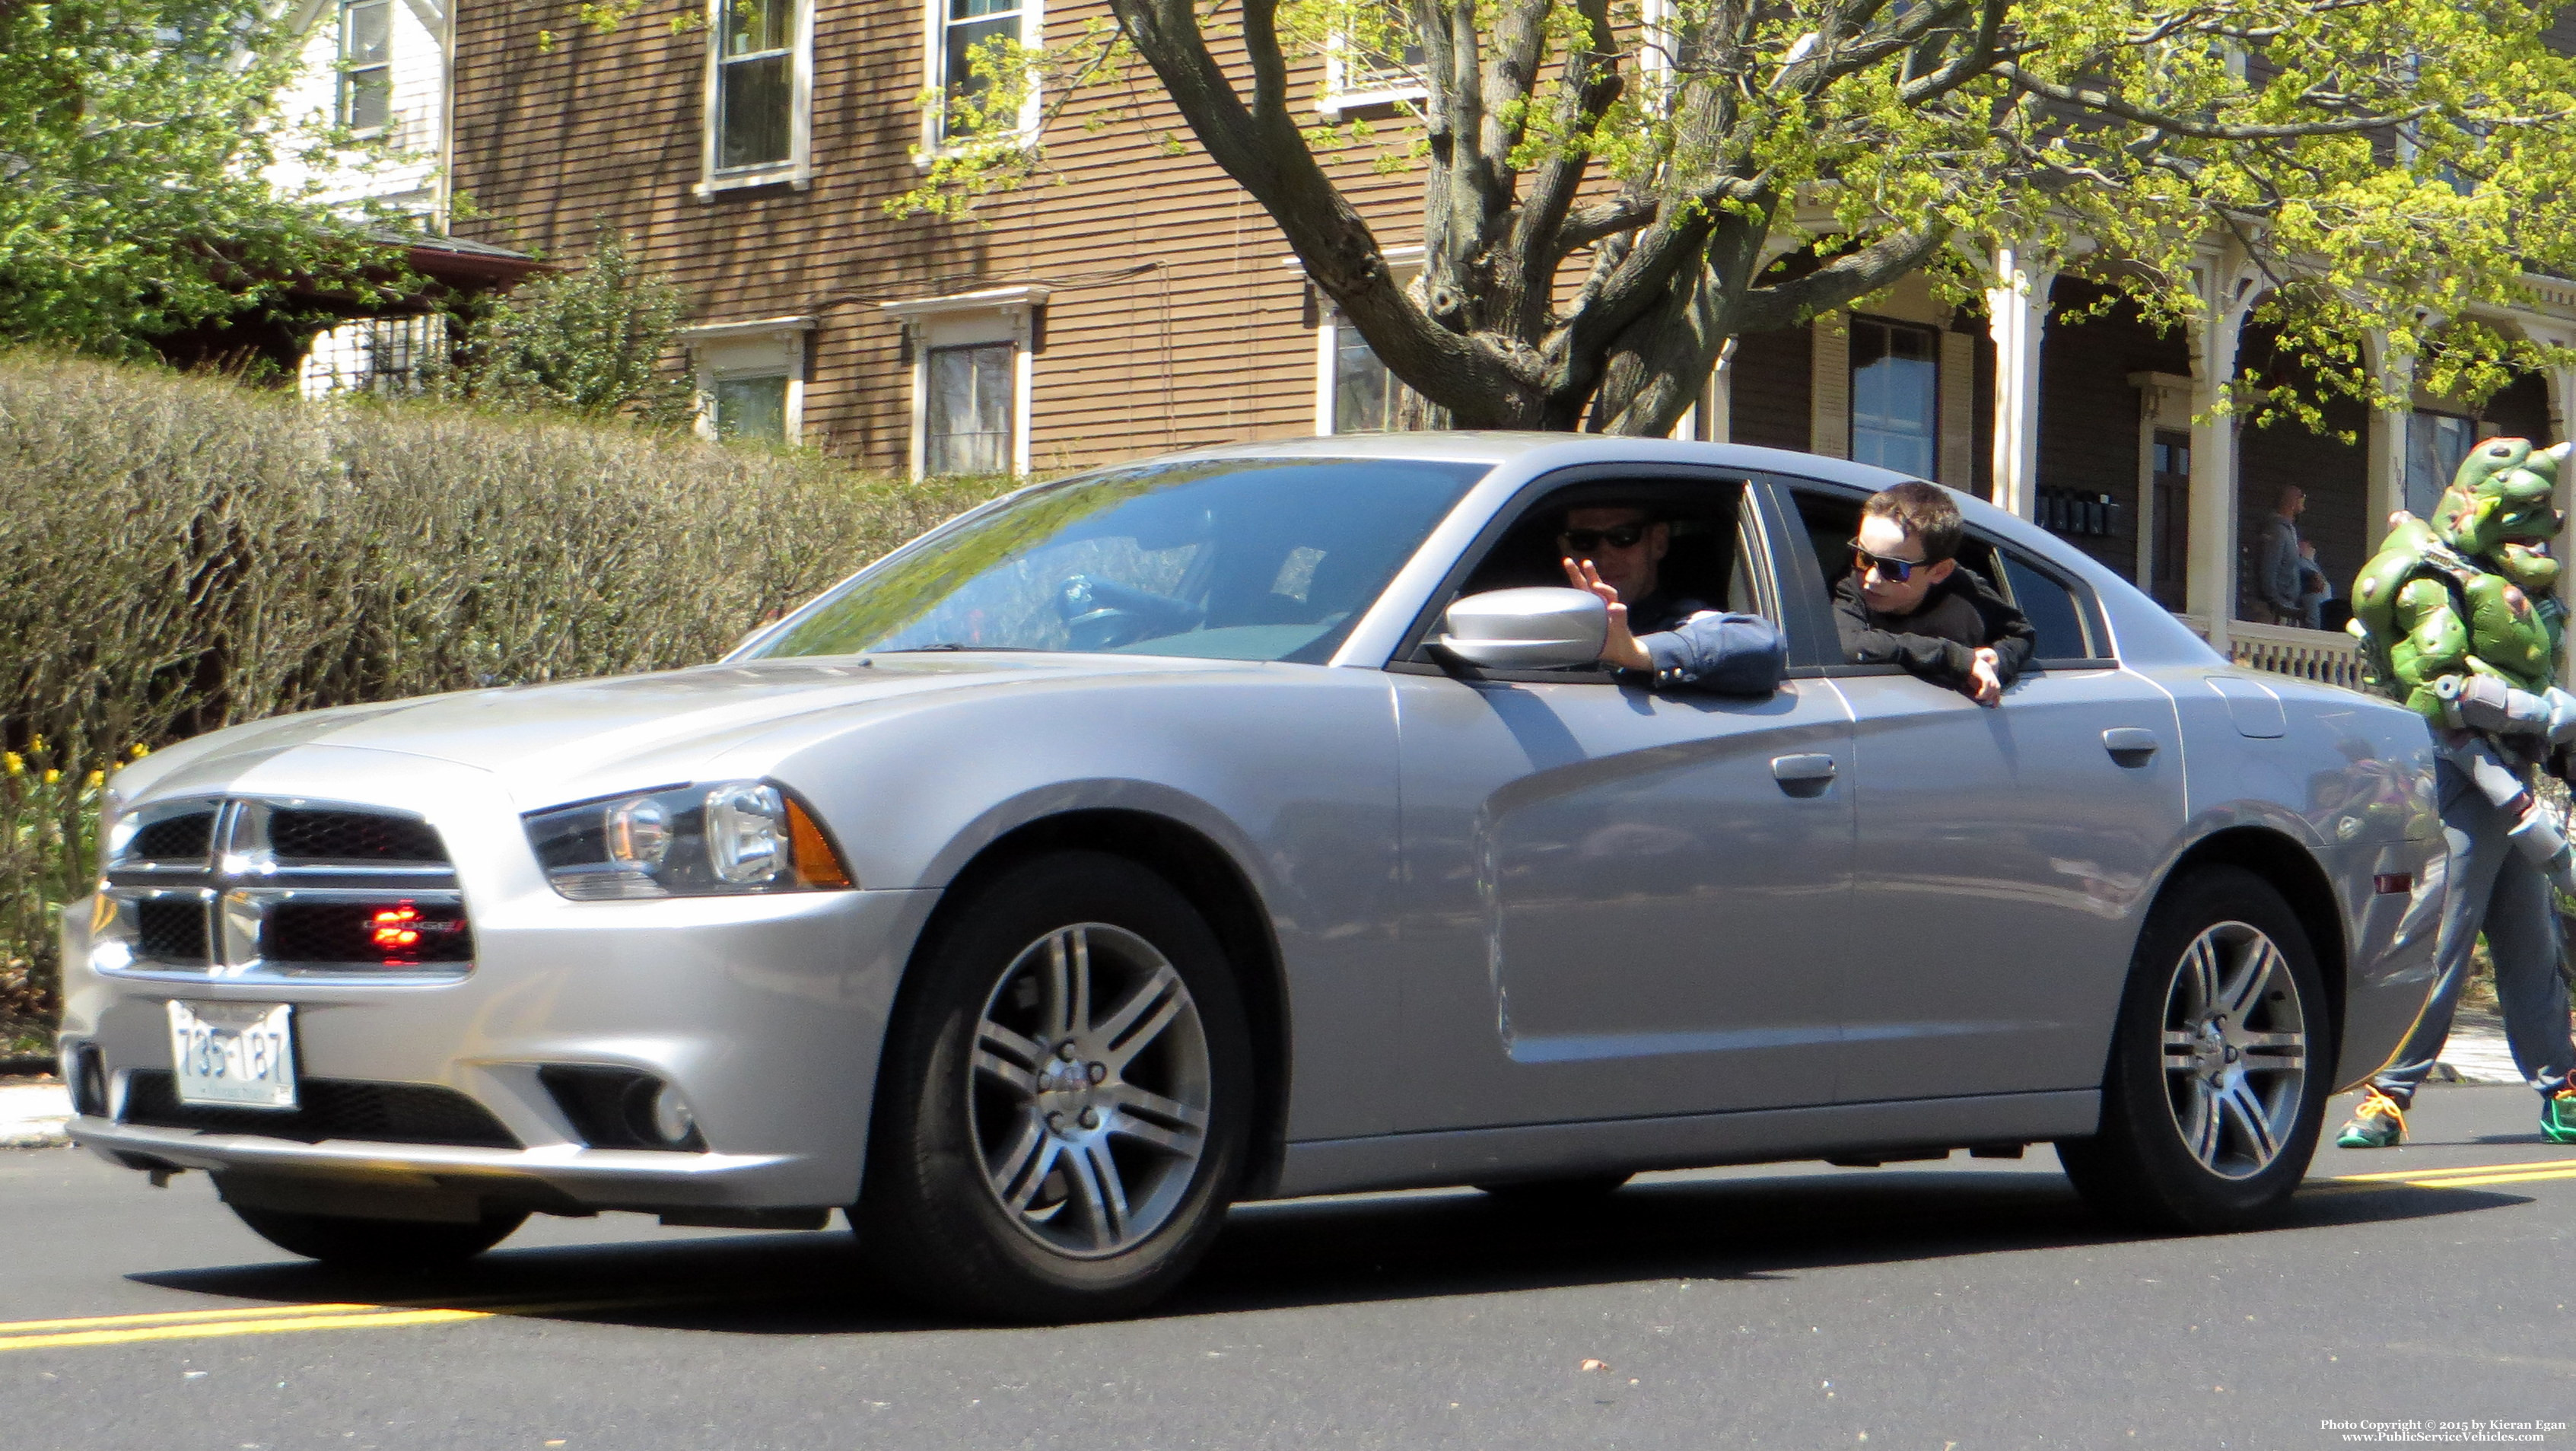 A photo  of South Kingstown Police
            Unmarked Unit, a 2011-2014 Dodge Charger             taken by Kieran Egan